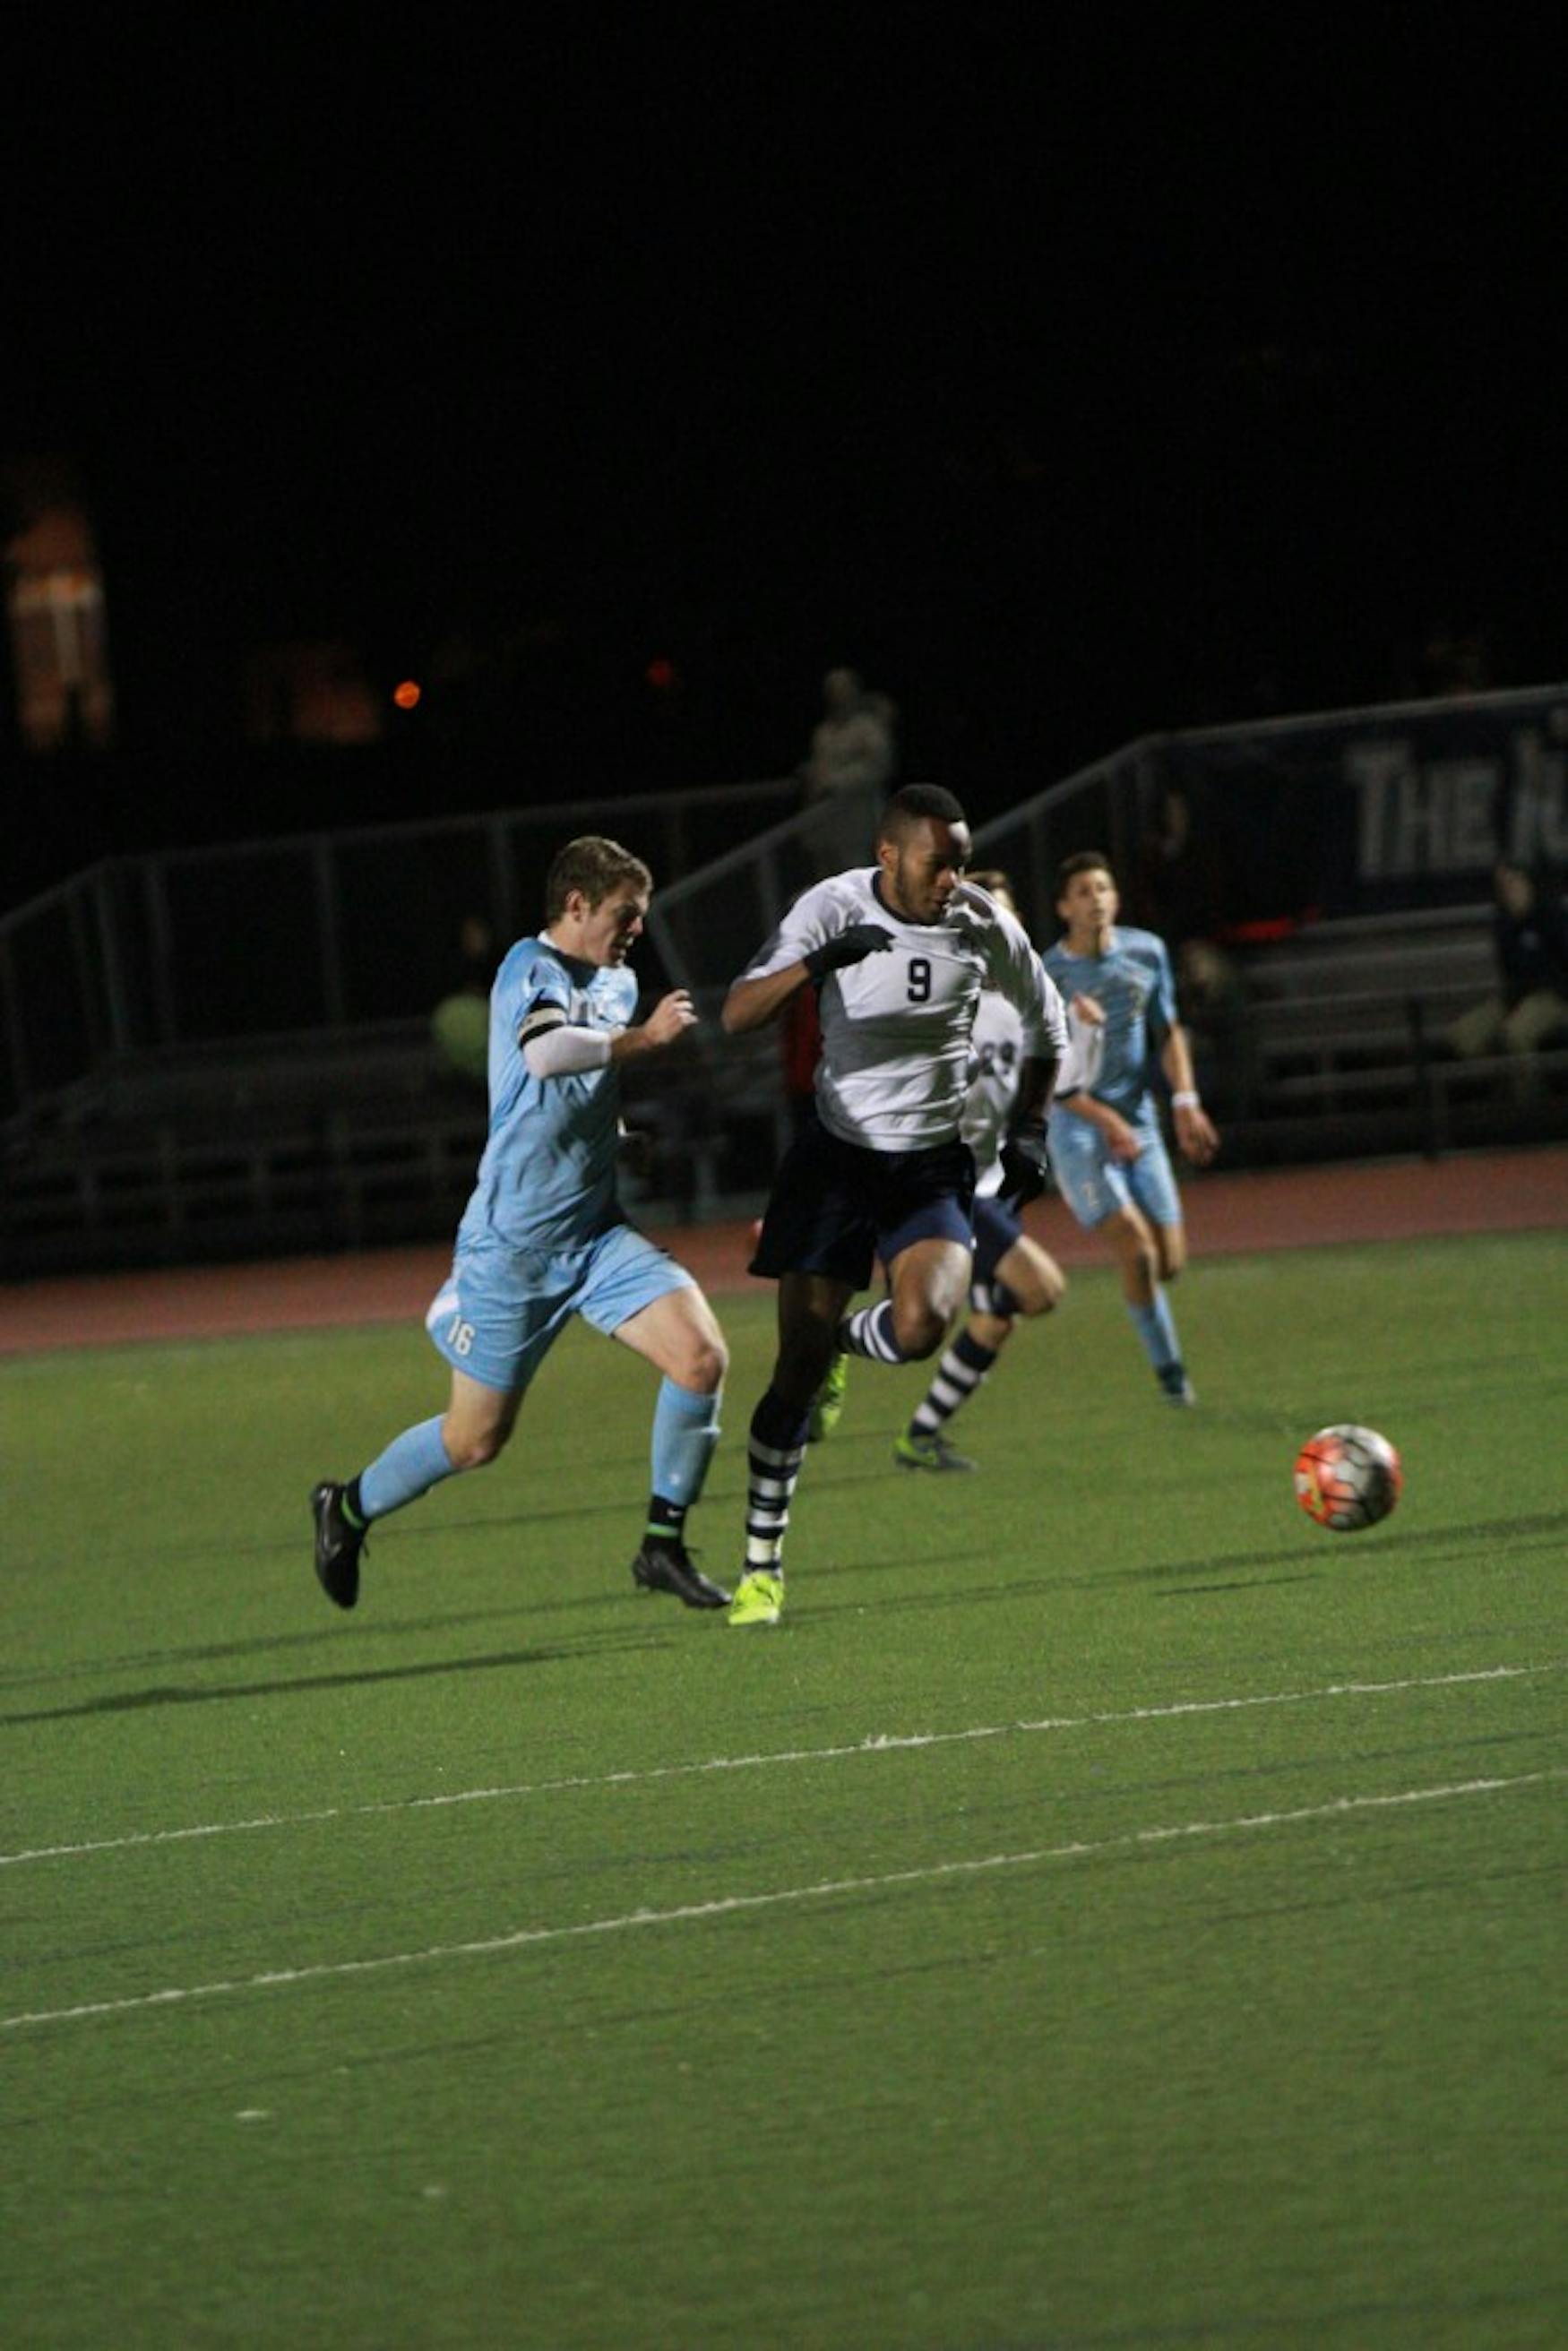 COMING UP CLUTCH: Forward Chris Bradley ’16 dribbles the ball upfield against Lasell College this past Wednesday night.